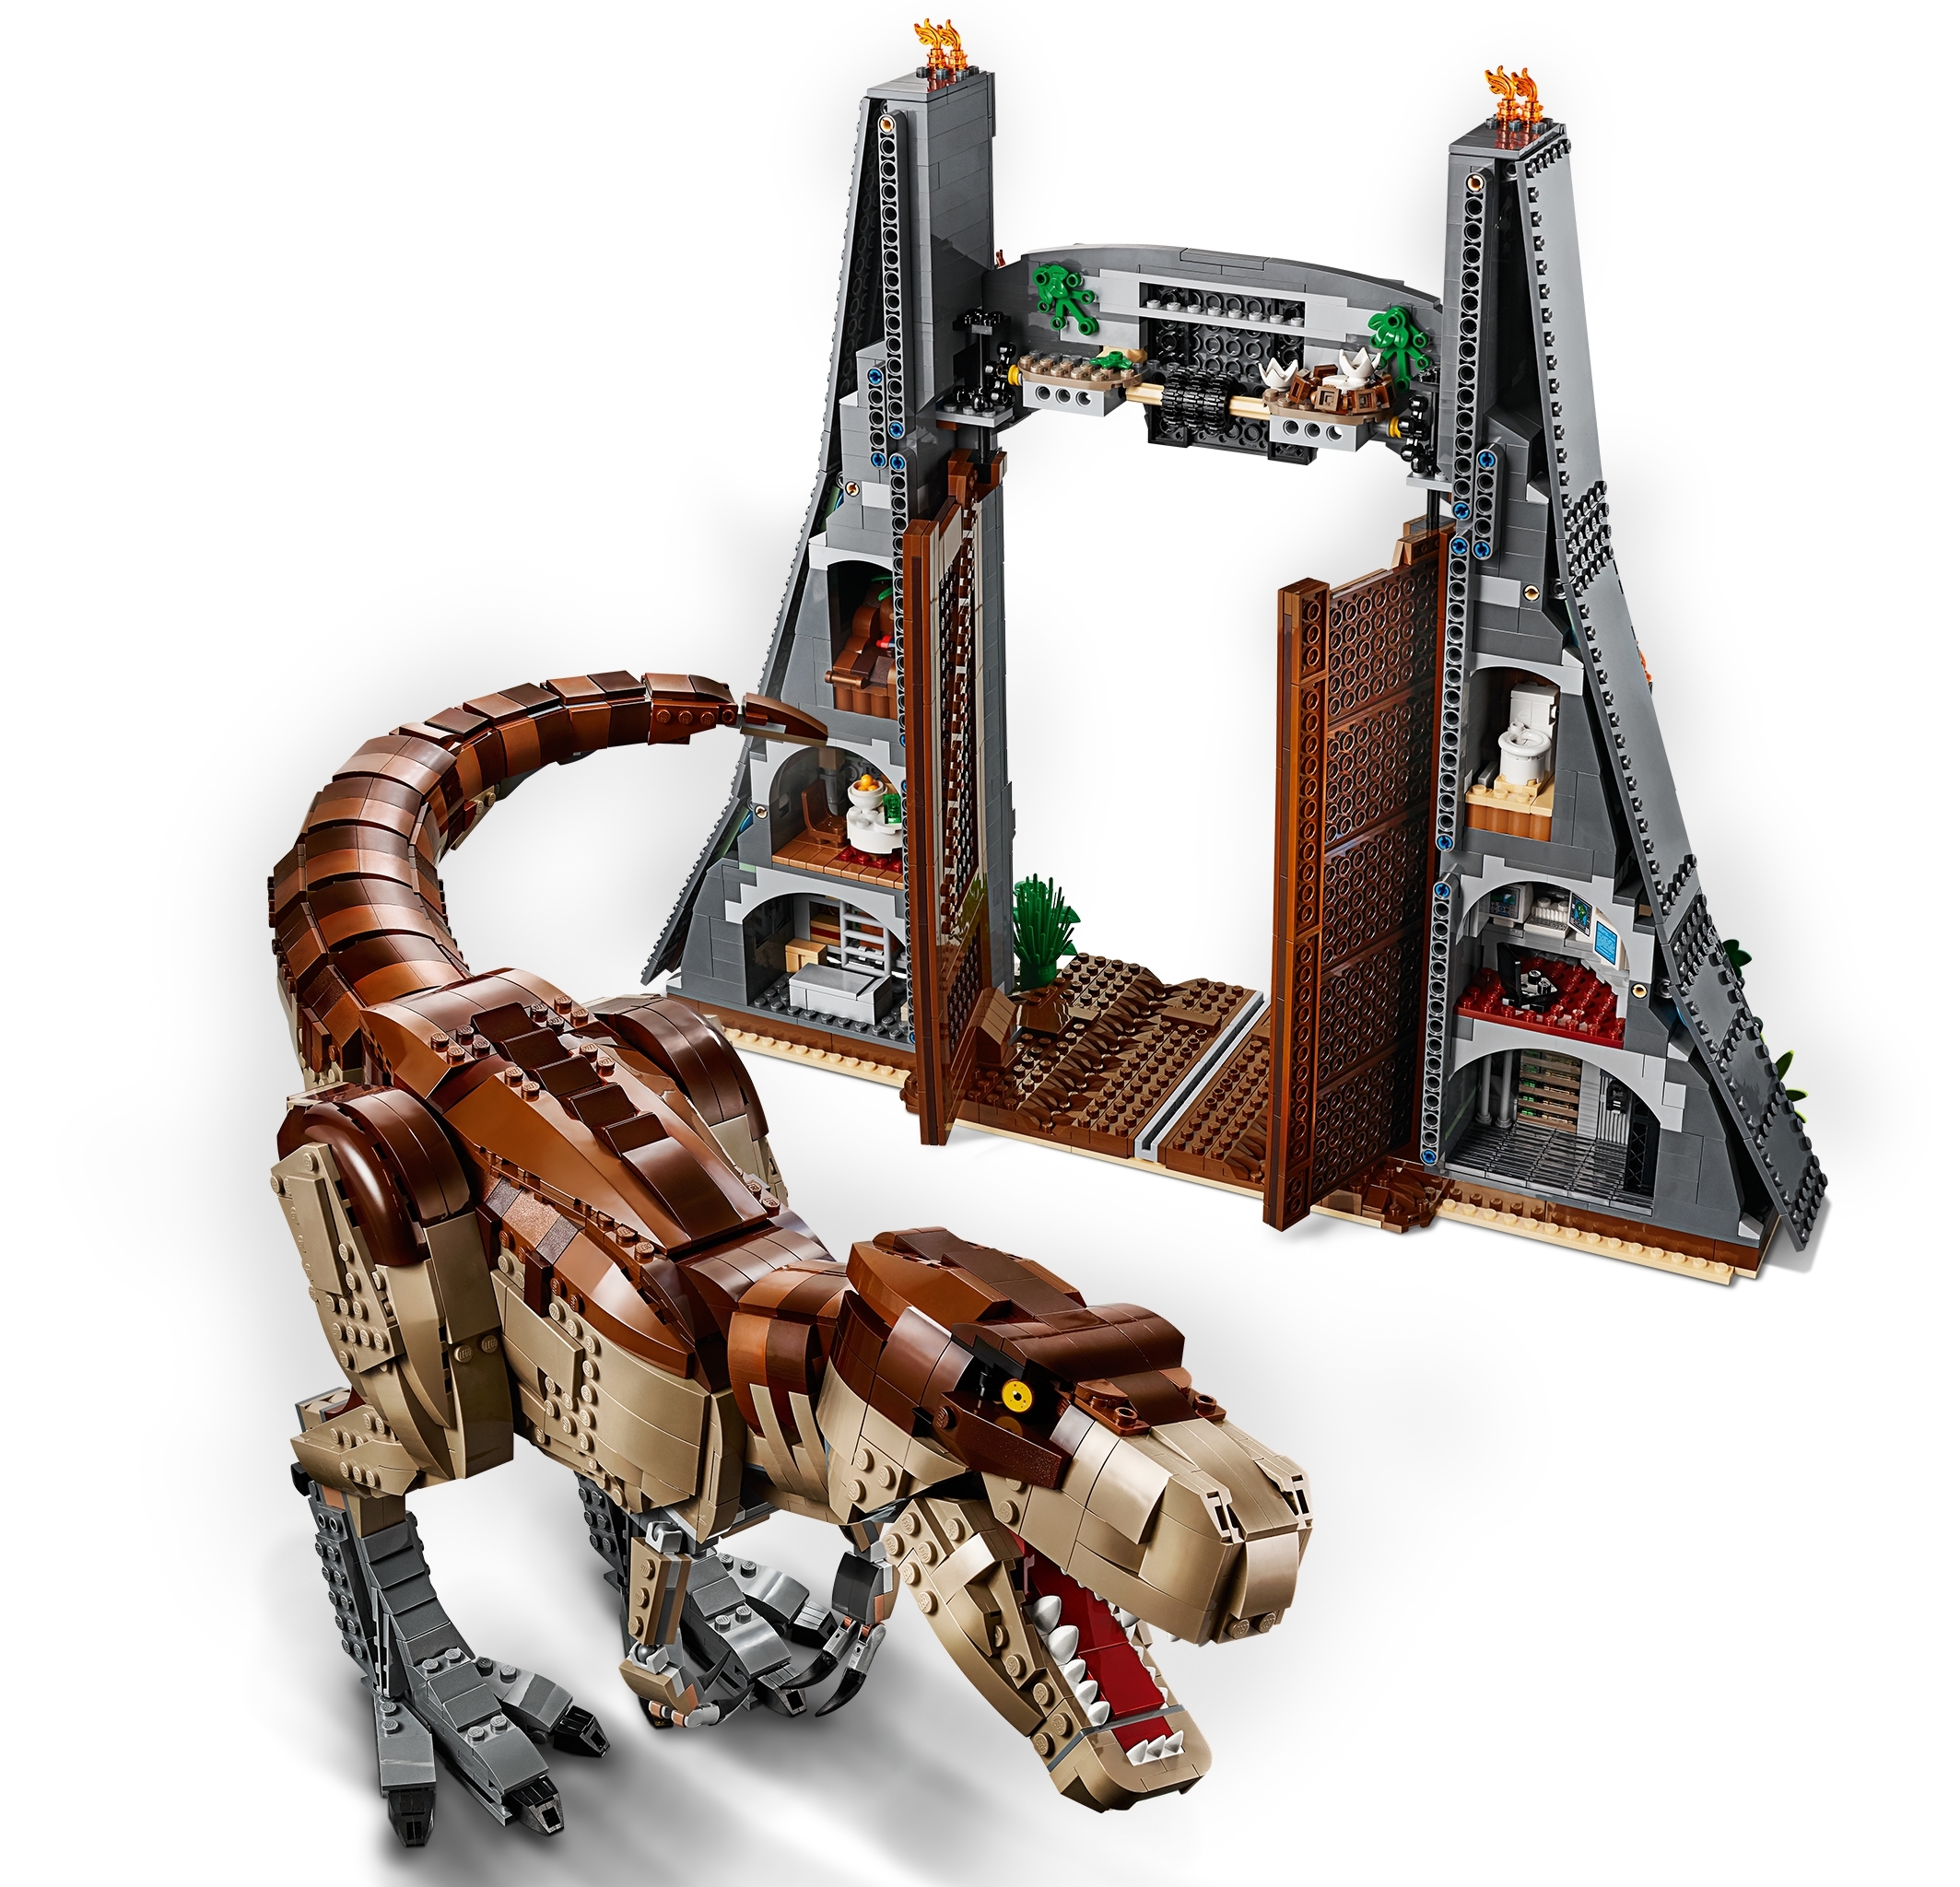 Jurassic Park: rex 75936 | World™ | Buy online at the Official LEGO® Shop